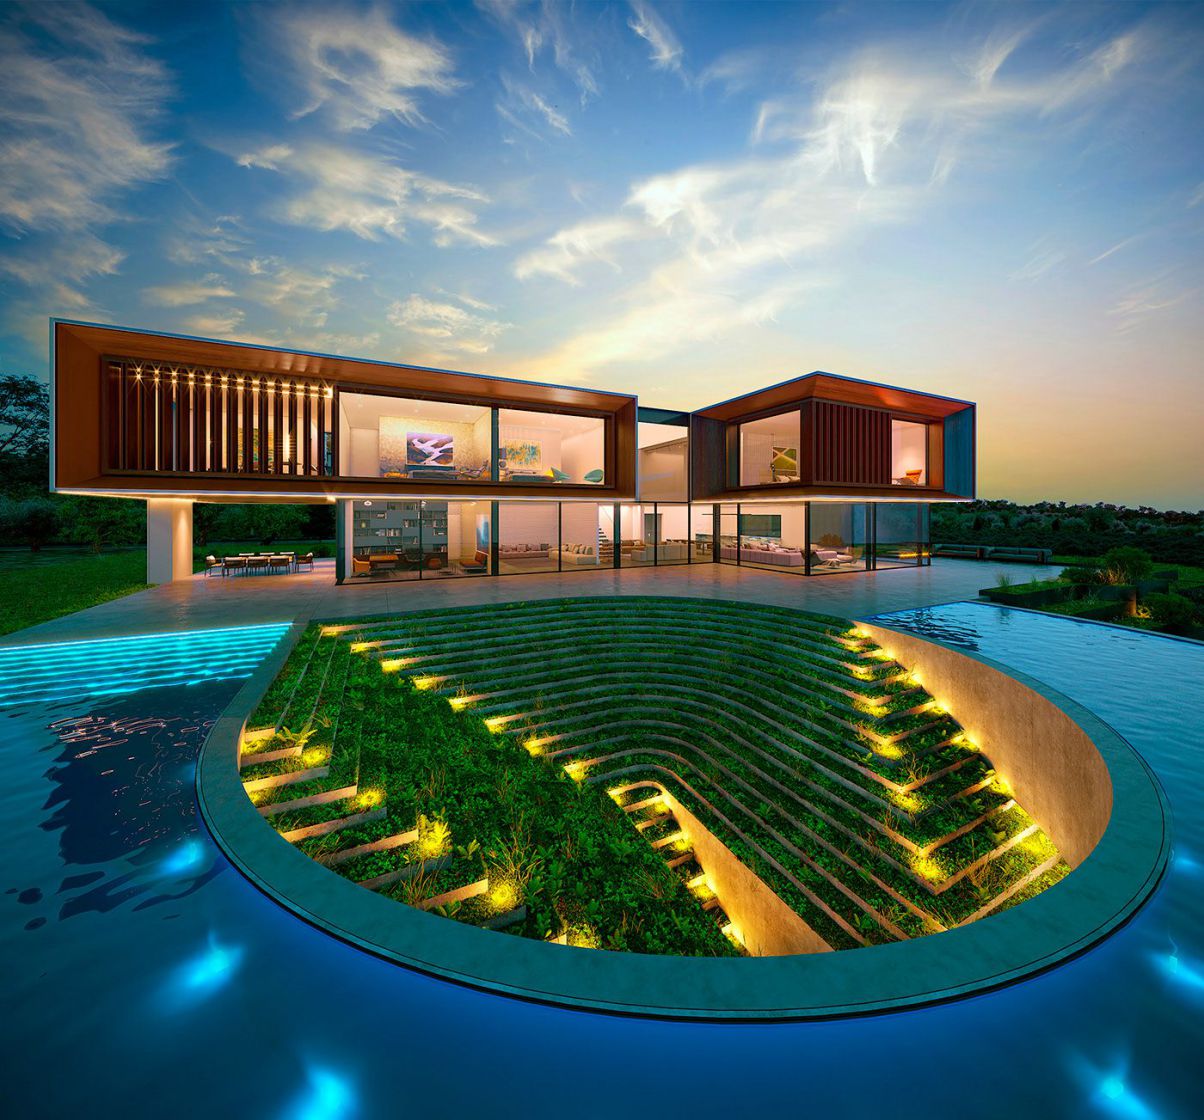 Hill House Design In India Design Concept Of House On The Hill By ...